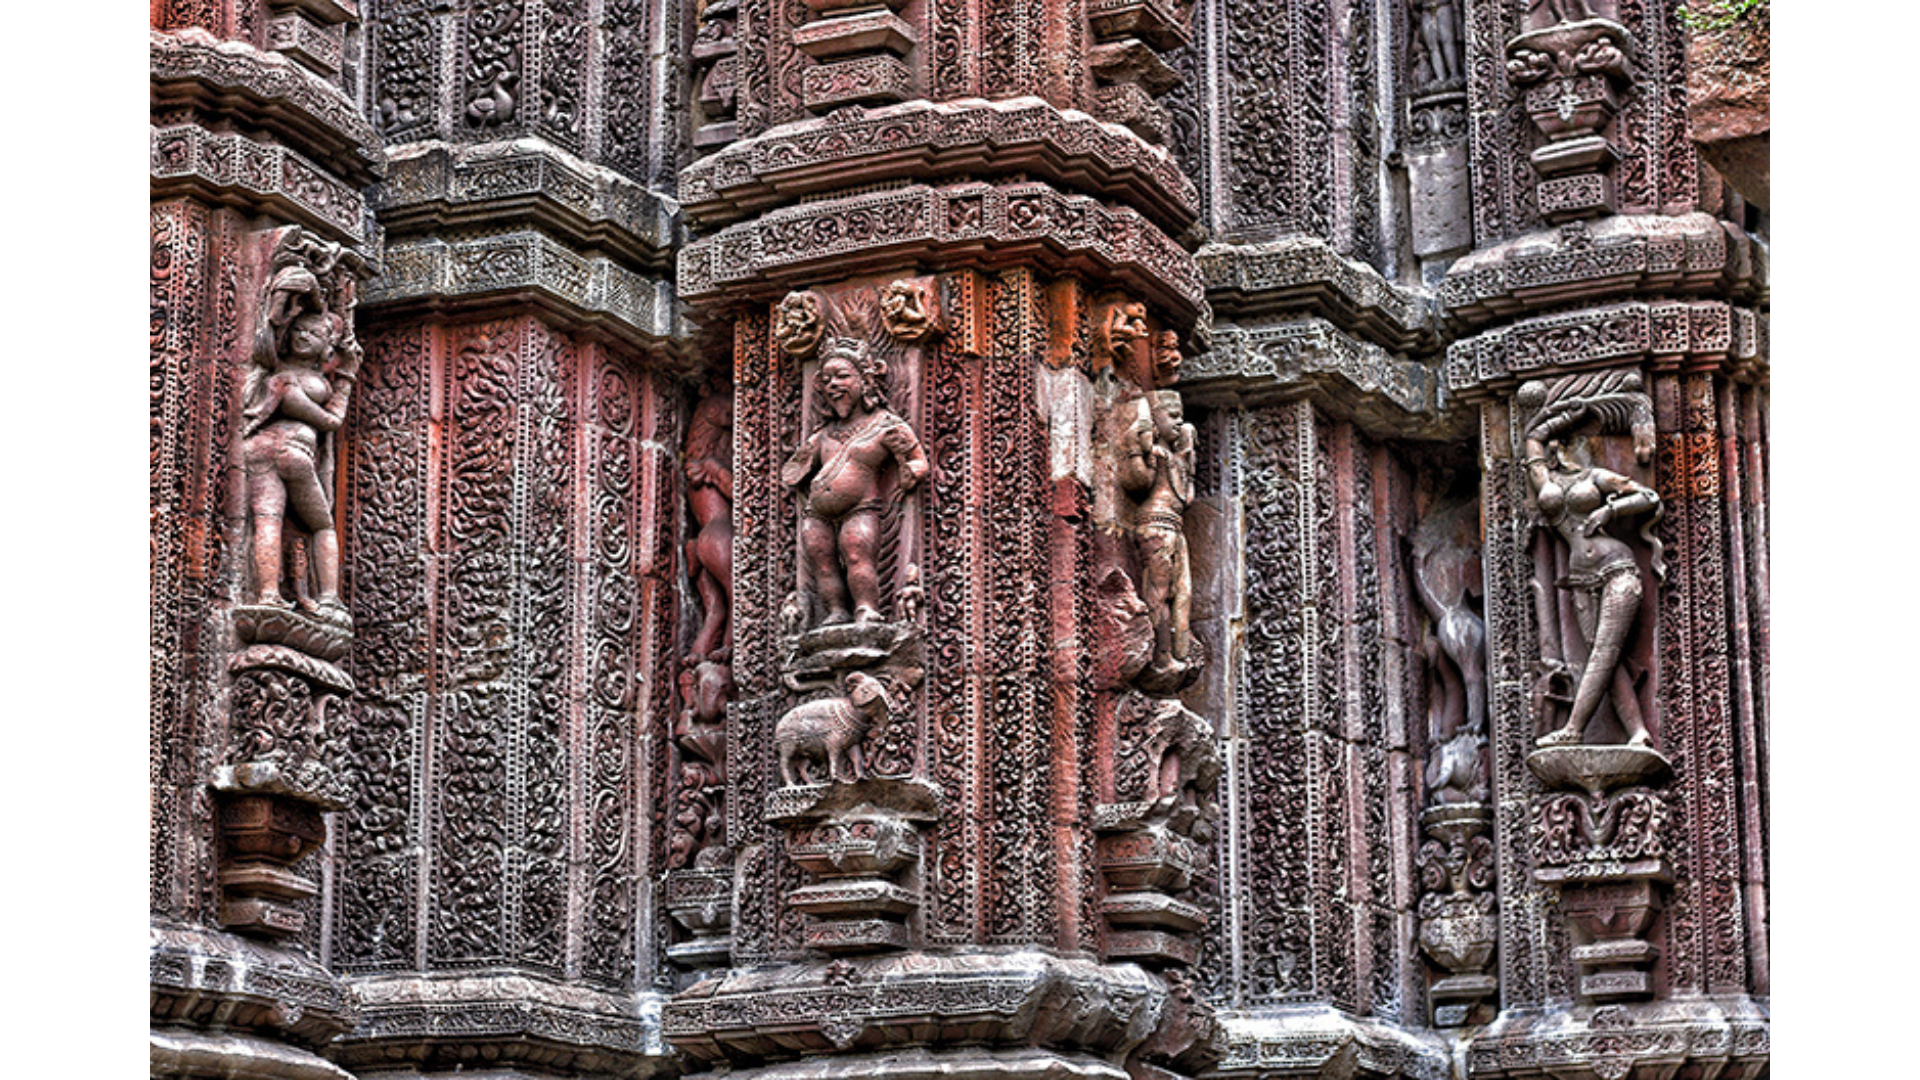 Agni, the God of Fire, and other figures carved on the temple’s walls